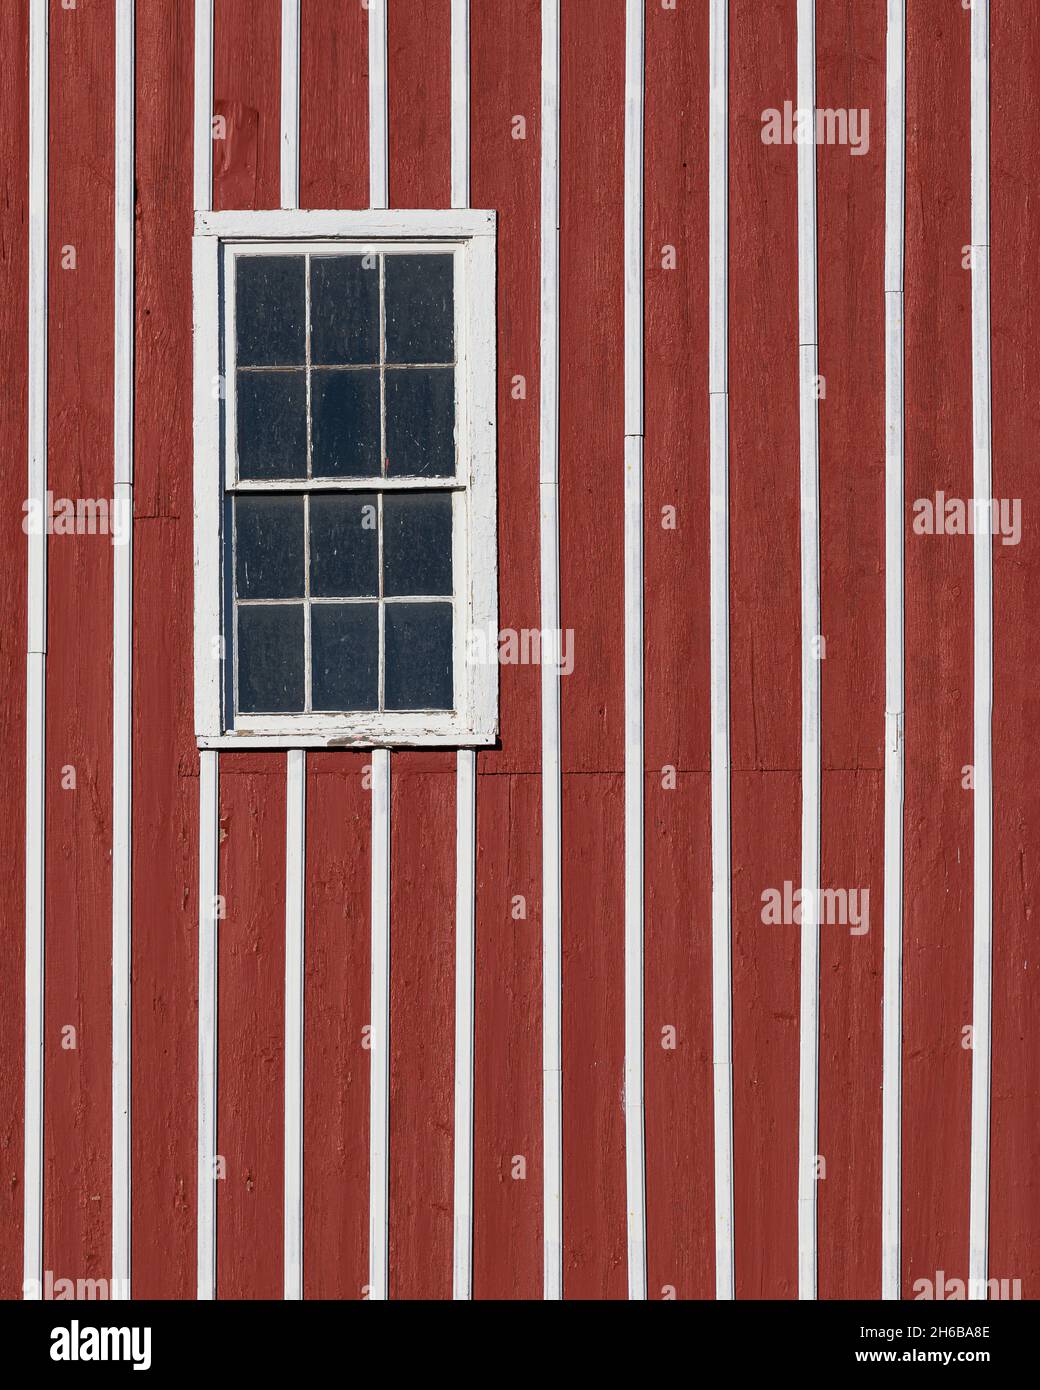 Window on red and white striped wooden exterior wall of a barn Stock Photo